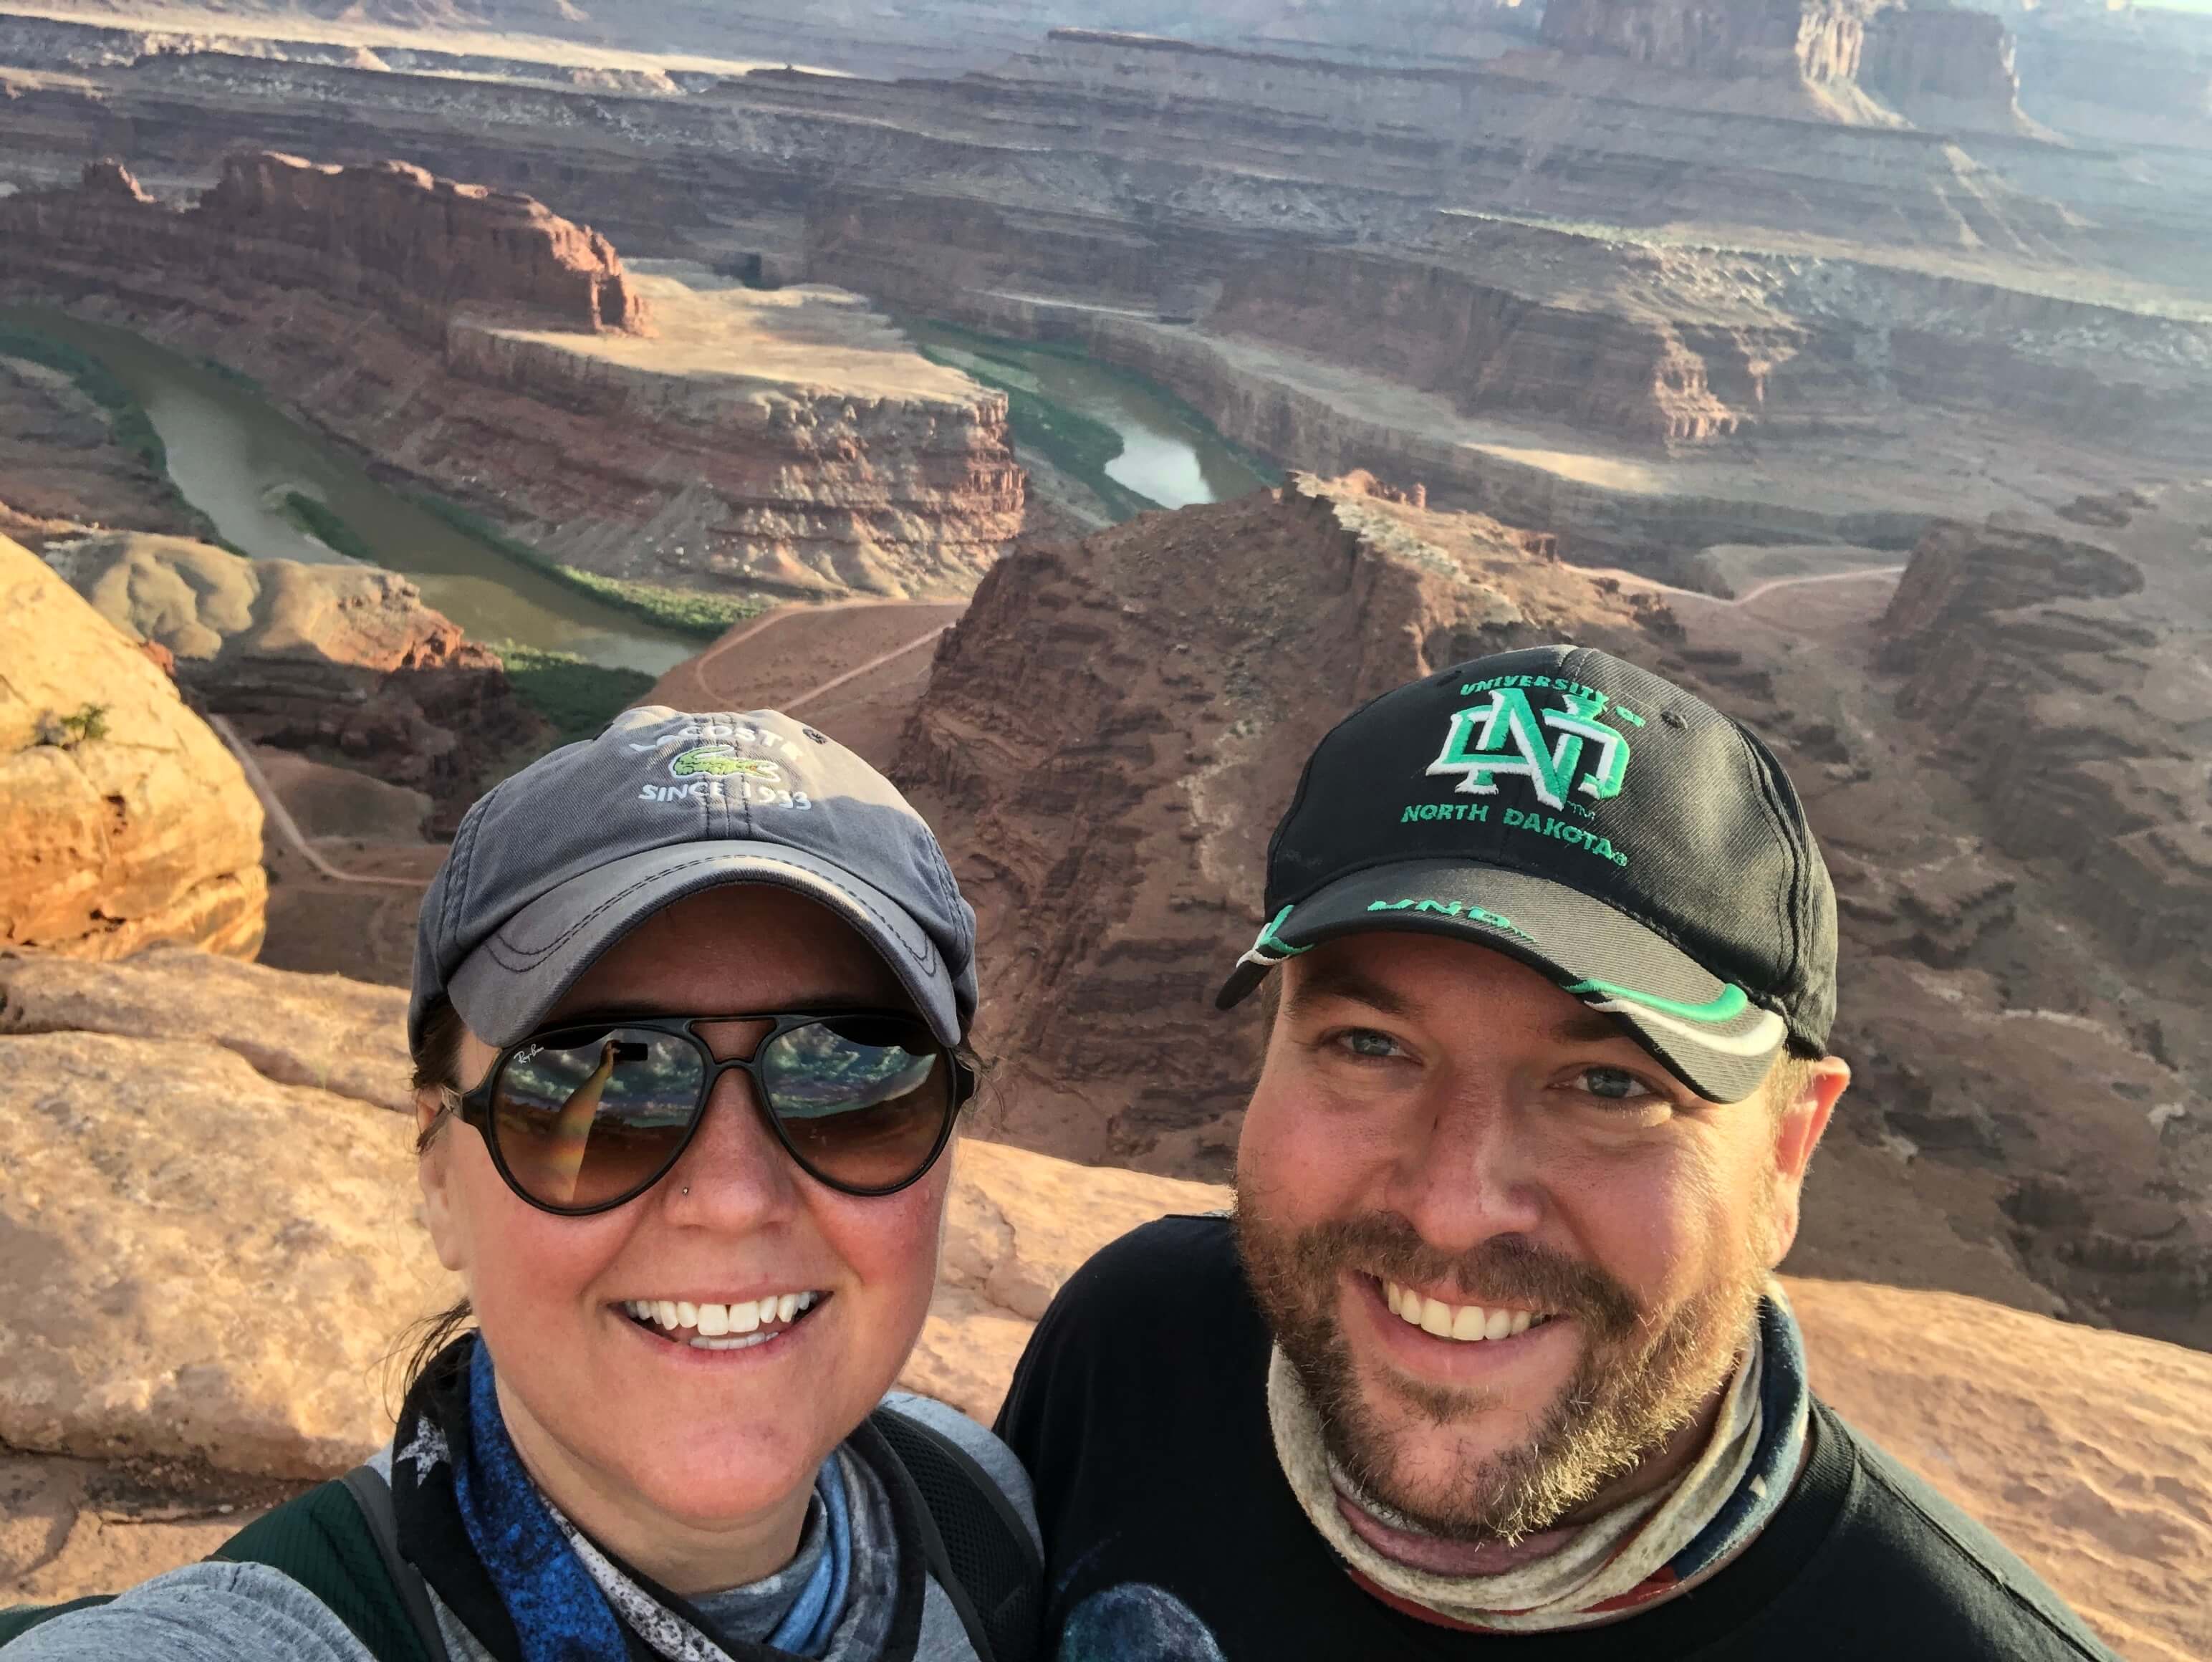 Bryan and Shelly at Dead Horse Point, South Dakota